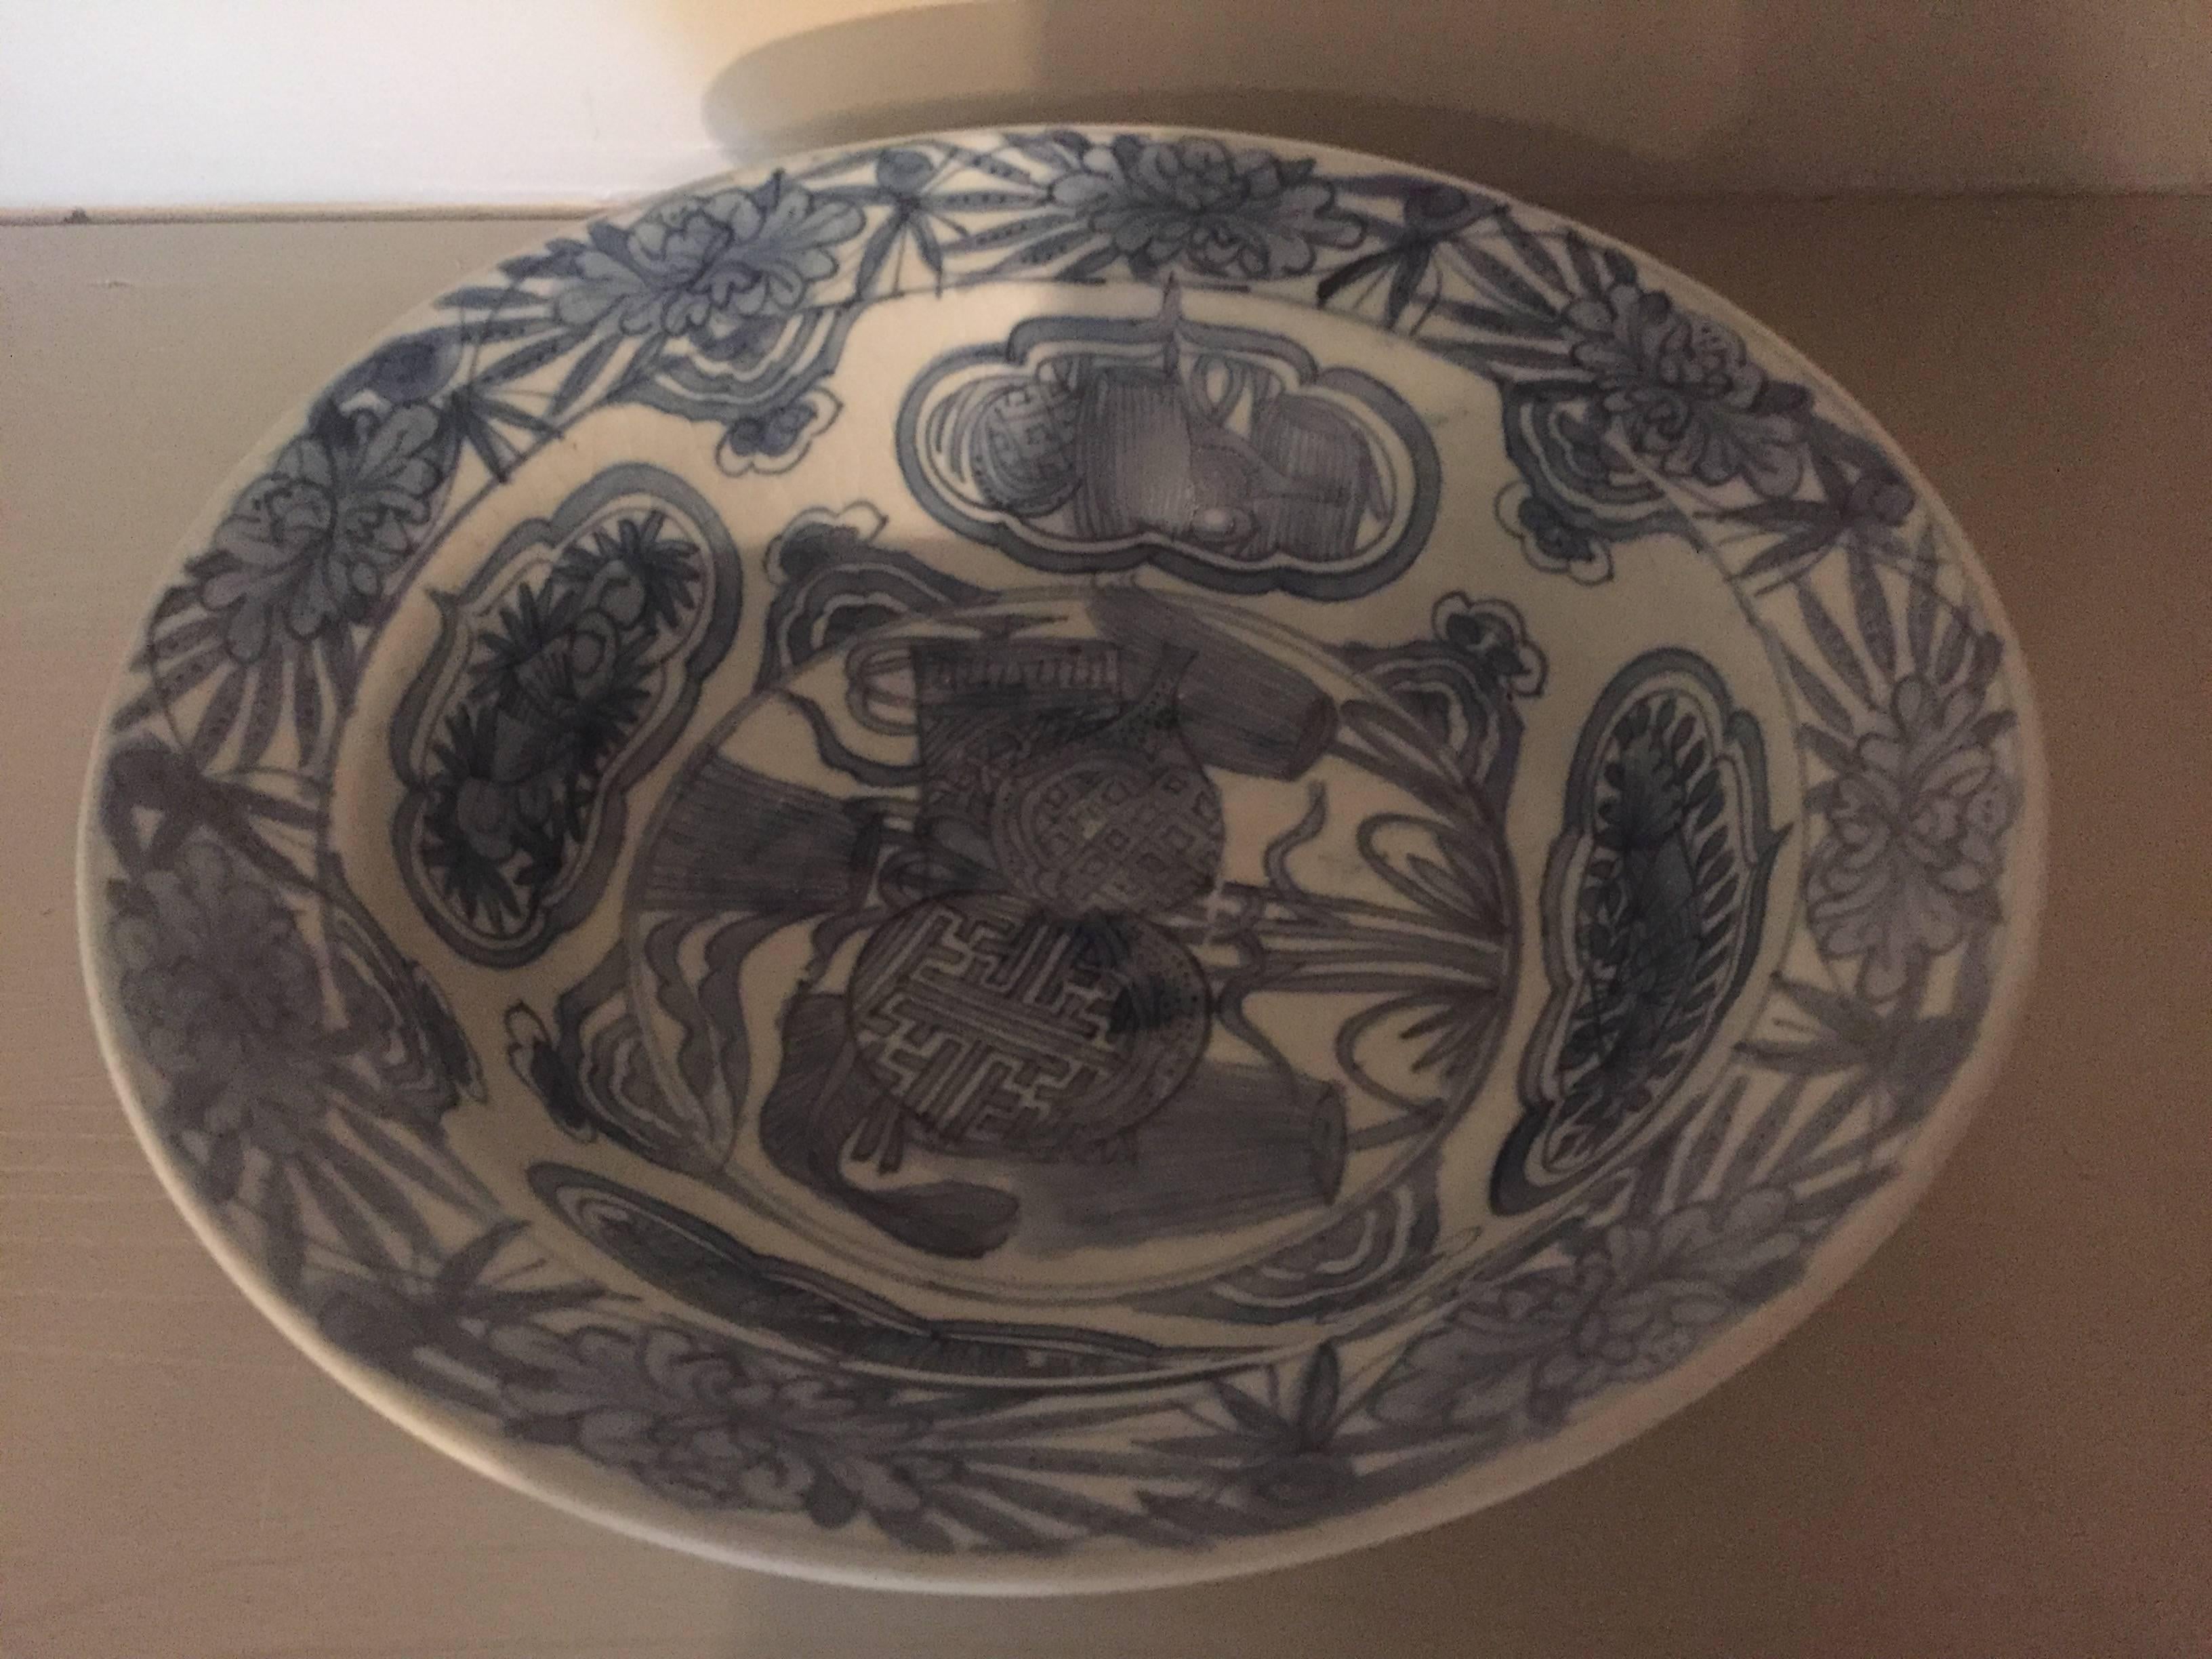 Painted Deep Plate, Blue and White Porcelain, Ming Dynasty, China